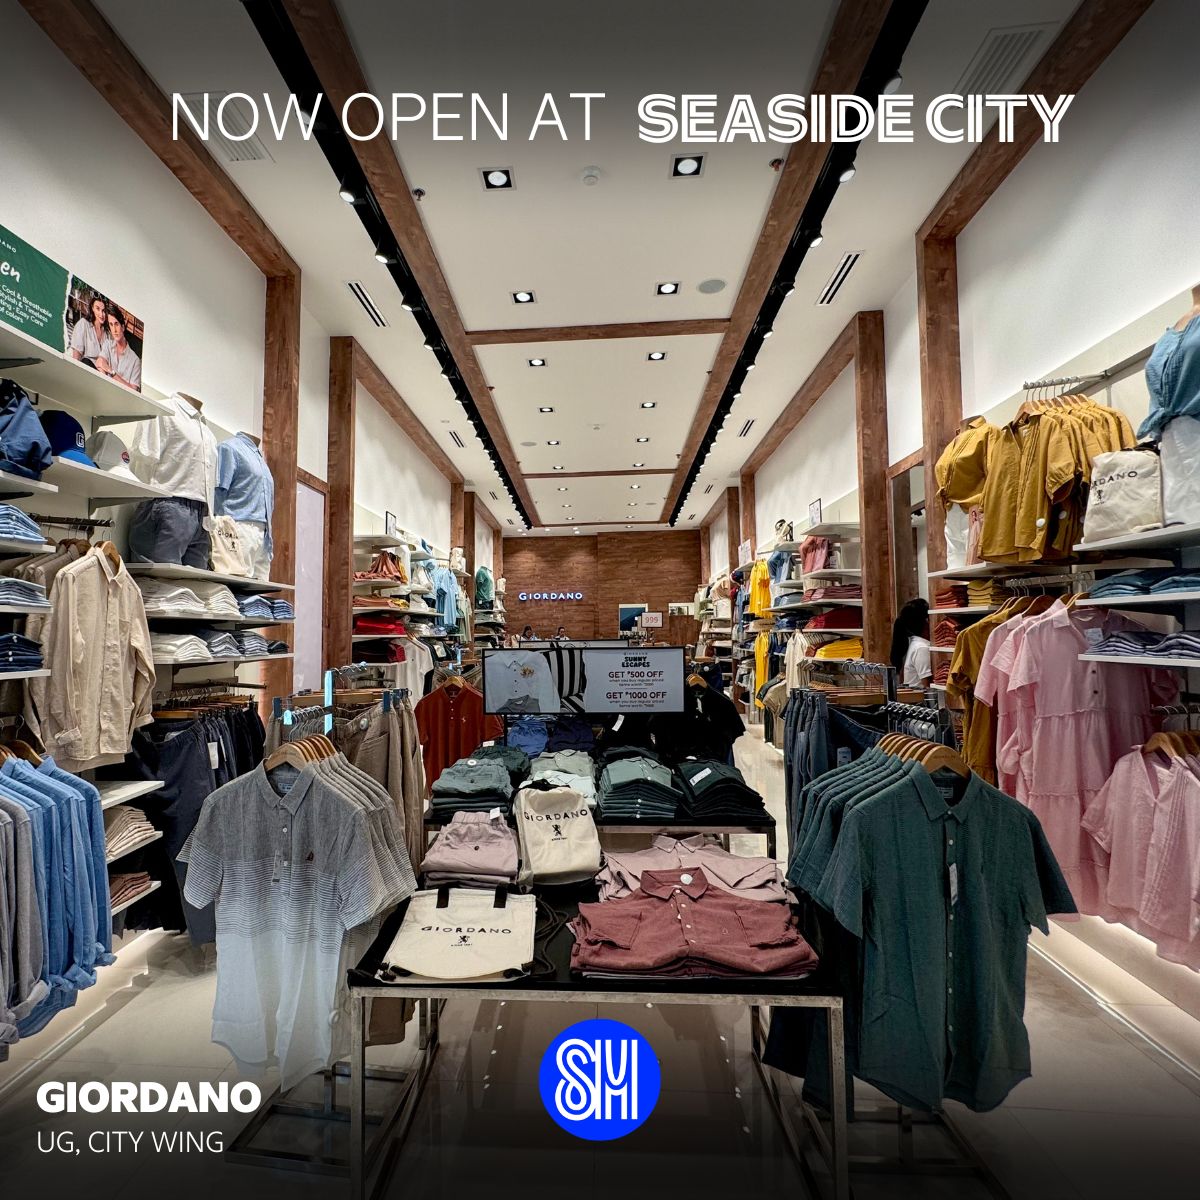 GIORDANO is NOW OPEN! 📷 Timeless fashion for everyone has arrived at SM Seaside! Refine your wardrobe at Giordano. Visit them now at the Upper Ground Level, City Wing. 📷 #EverythingsHereAtSM #AWorldOfExperienceAtSM